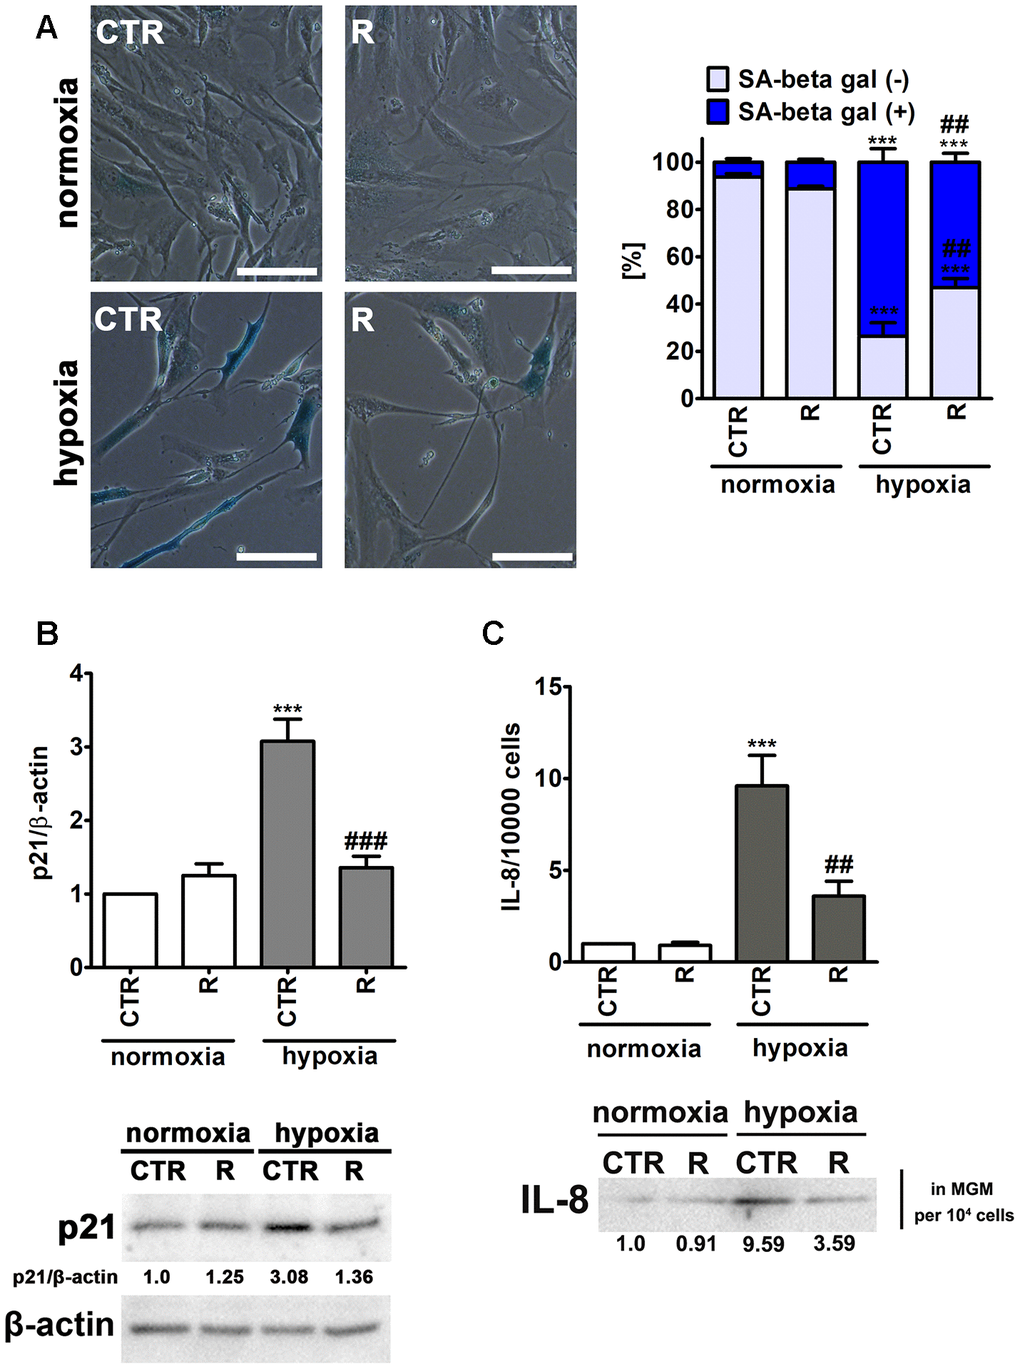 Remifentanil preconditioning protects against hypoxia-induced senescence in HCM cells. (A) Senescence-associated β-galactosidase (SA-β-gal) activity. Representative microphotographs are shown. Scale bars 50 μm, objective 20×. The levels of SA-β-gal positive (blue) and negative (no blue) cells were calculated [%]. (B) Western blot analysis of the levels of cell cycle inhibitor p21. Data were normalized to β-actin. (C) Western blot analysis of the levels of pro-inflammatory cytokine IL-8. IL-8 levels in supernatants (Myocyte Growth Medium, MGM) were calculated per 10000 cells. Bars indicate SD, n = 3, ***p ###p ##p a posteriori test). CTR, control; R, remifentanil preconditioning.